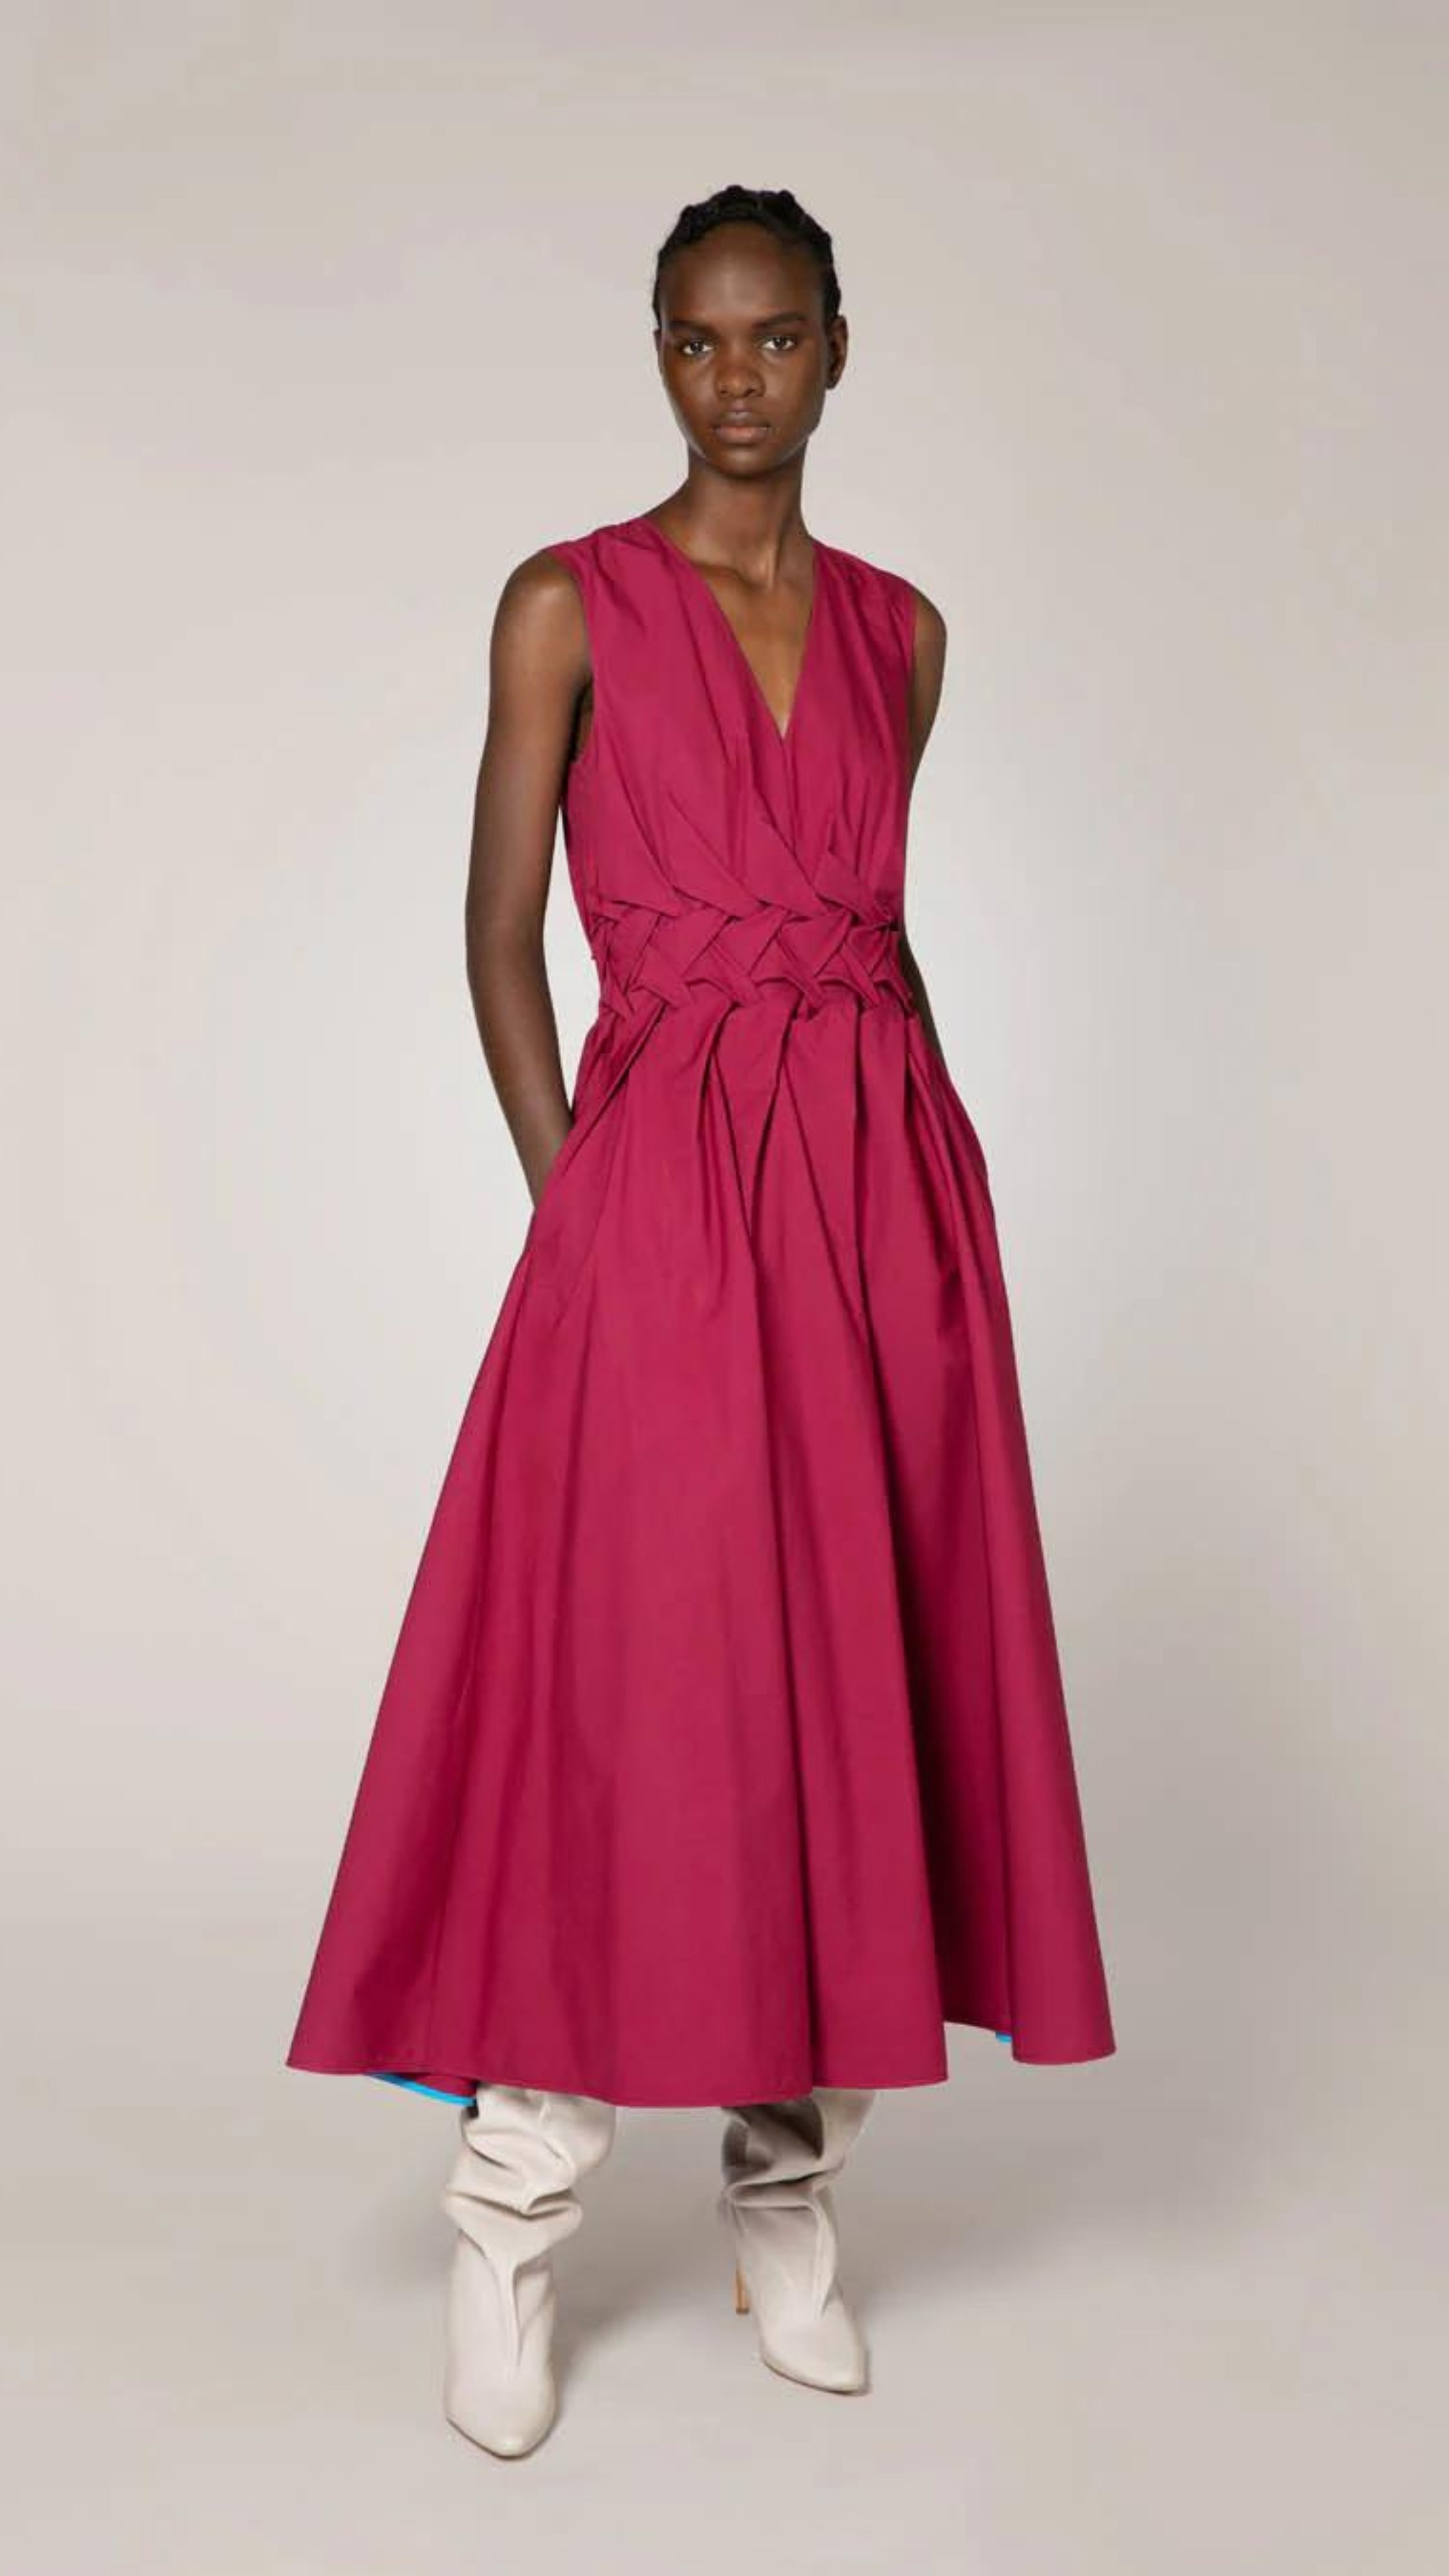 Roksanda Eifel Dress in Rose Wood colored cotton. With a V neckline, fitted waist with interested braided folding and a pleated skirt. Midi dress length. Photo shown on model facing front with hands in pockets.